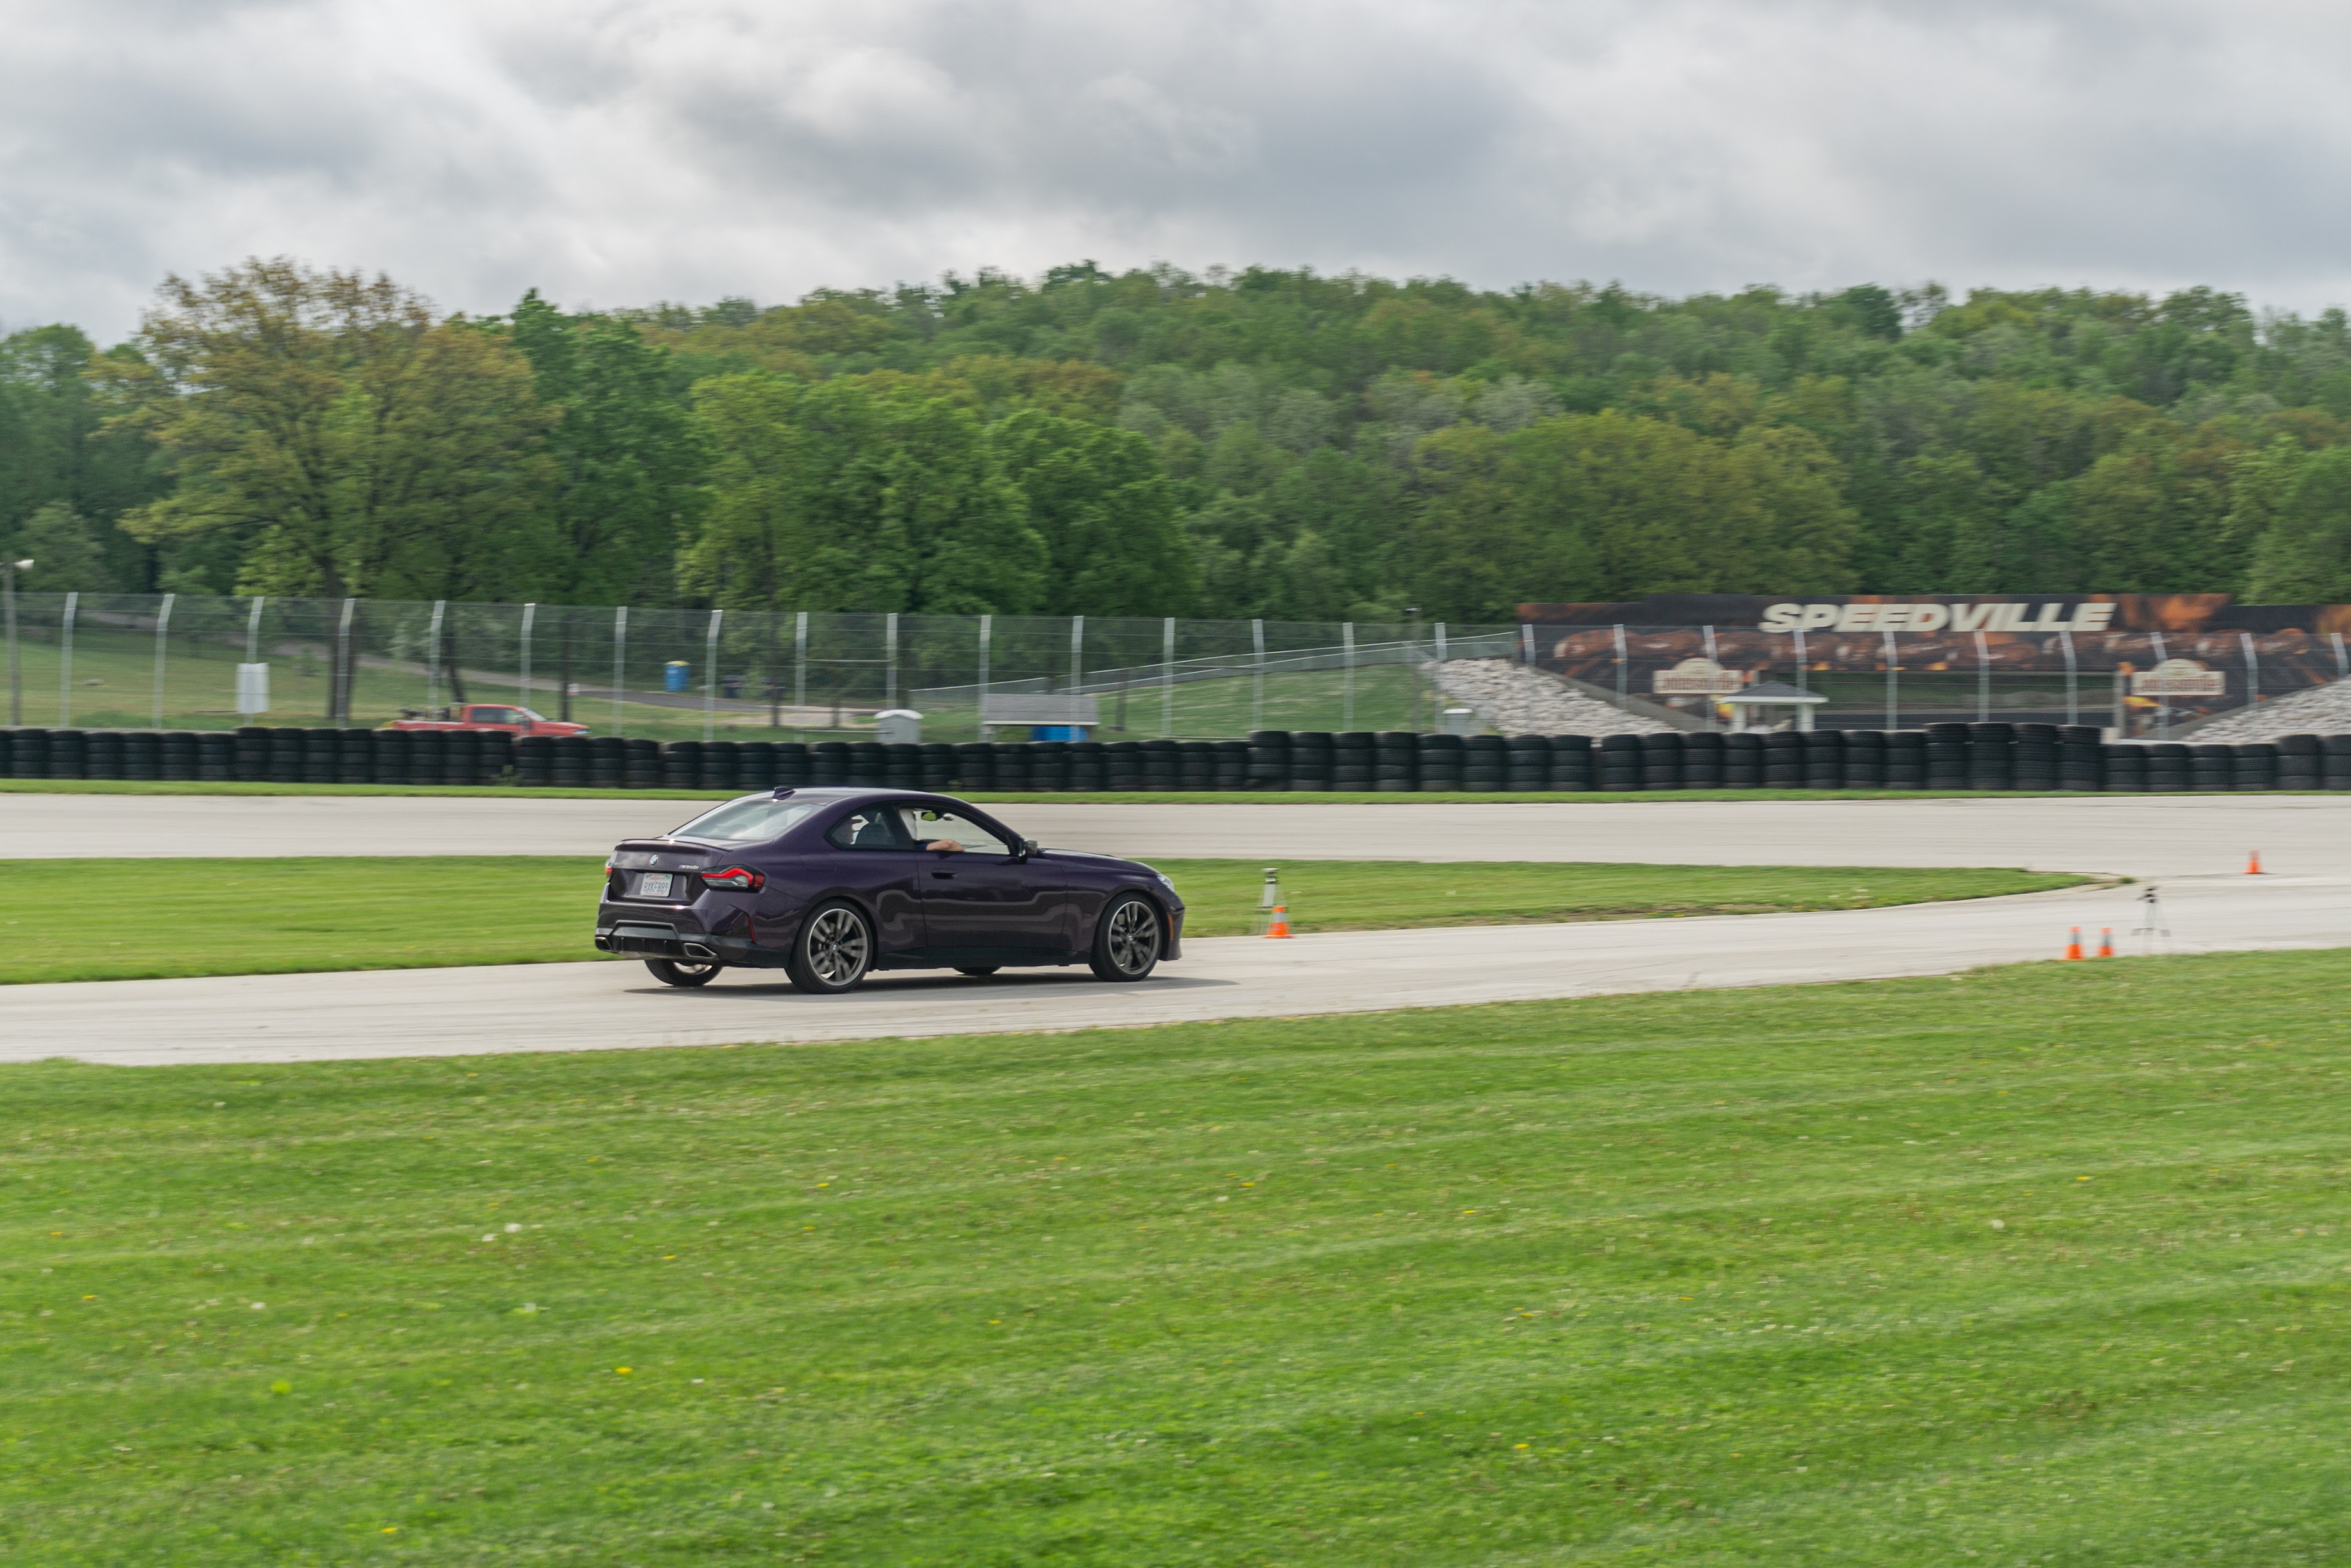 The rear 3/4 view of a purple 2022 BMW M240i xDrive Coupe racing on Road America's autocross course